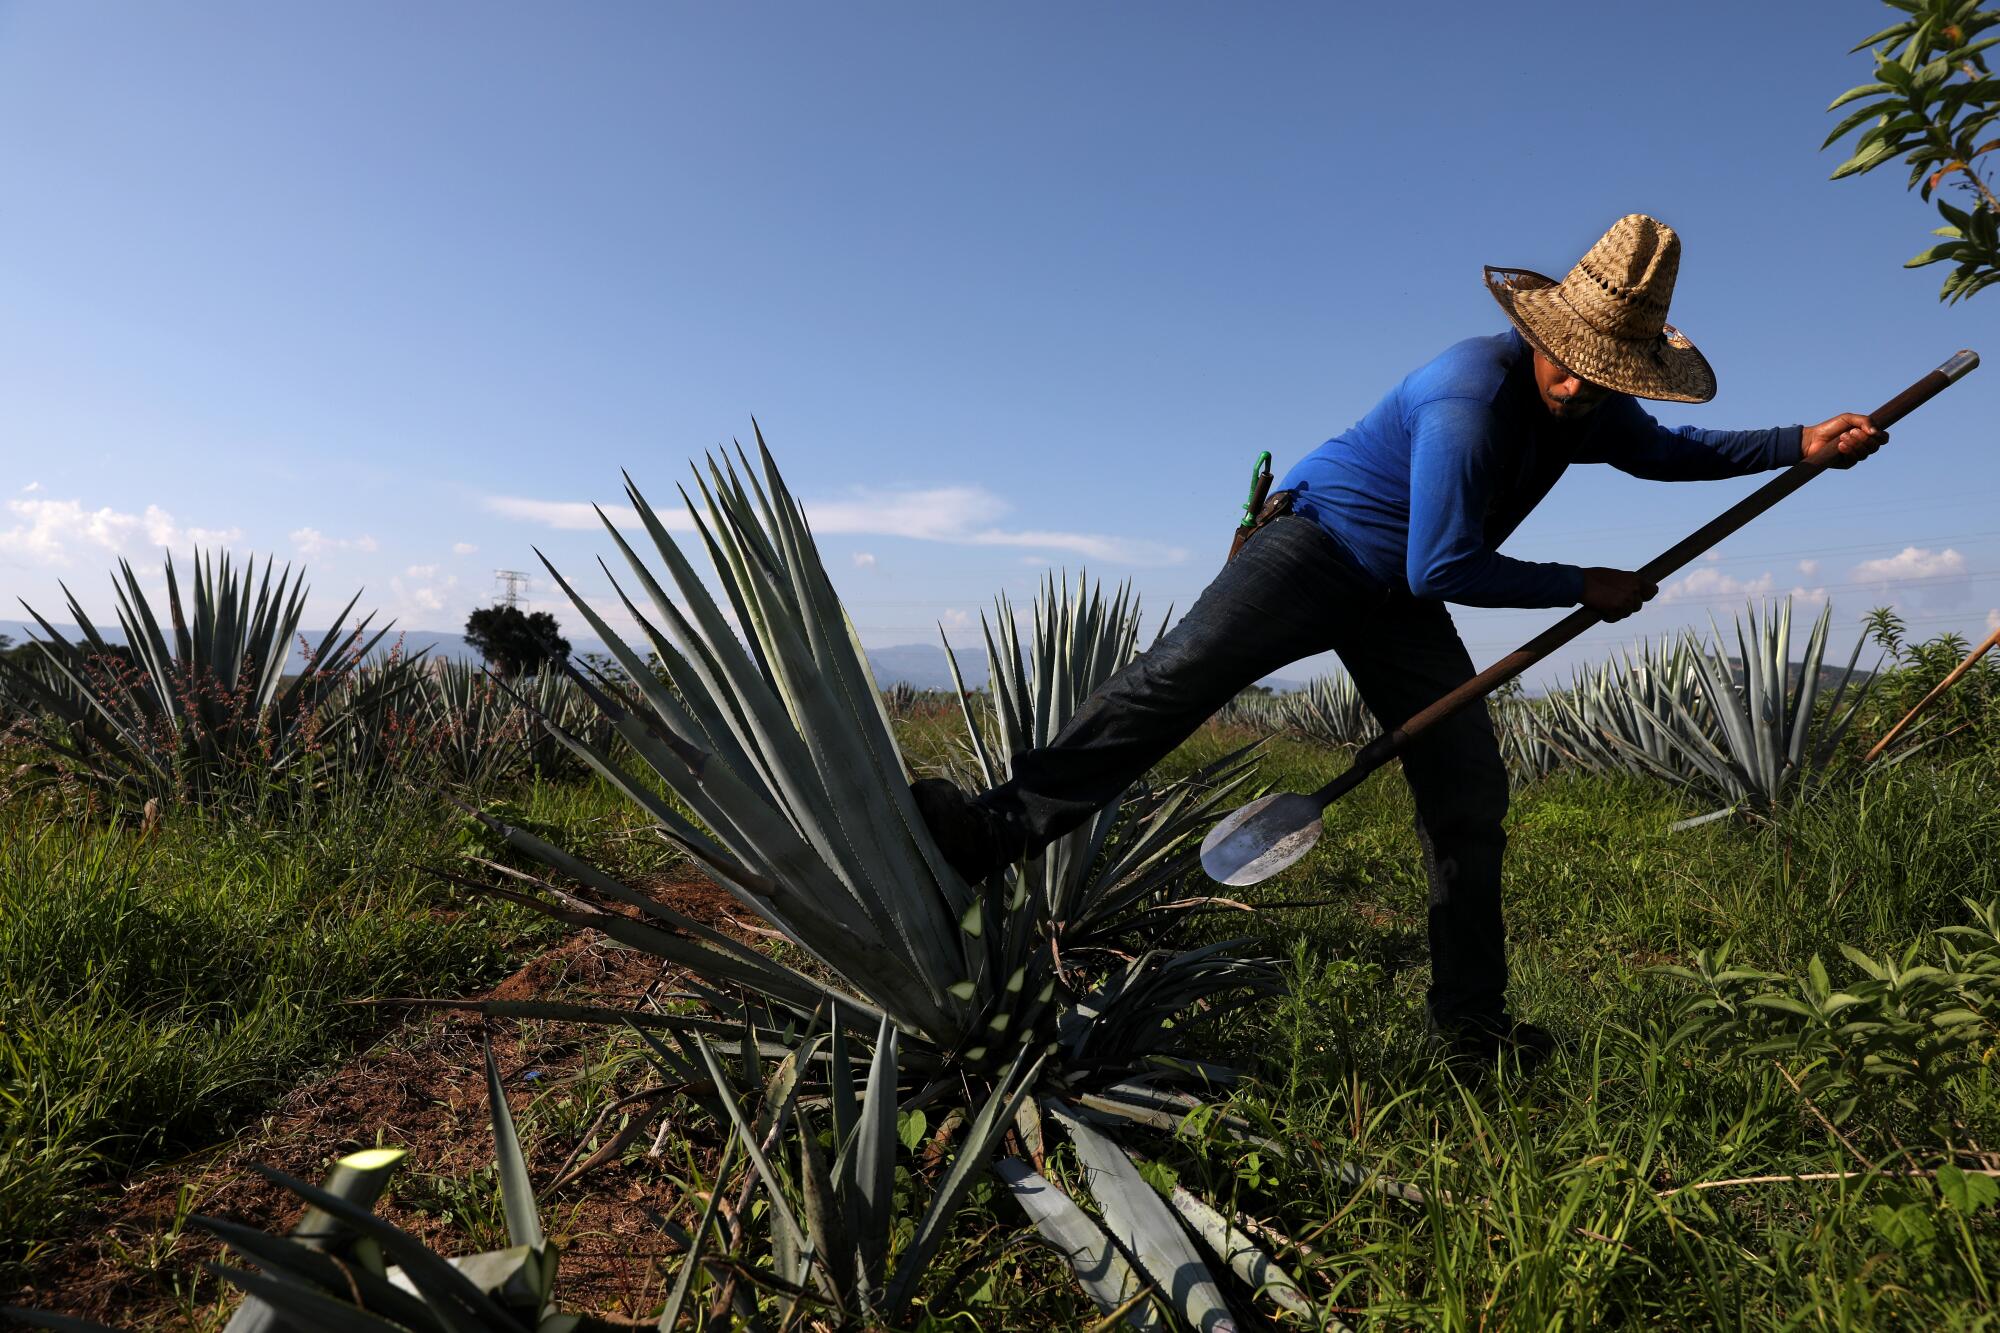 Guadalupe Ramos Santos uses a coa, a special knife, to cut the leaves on an agave plant.